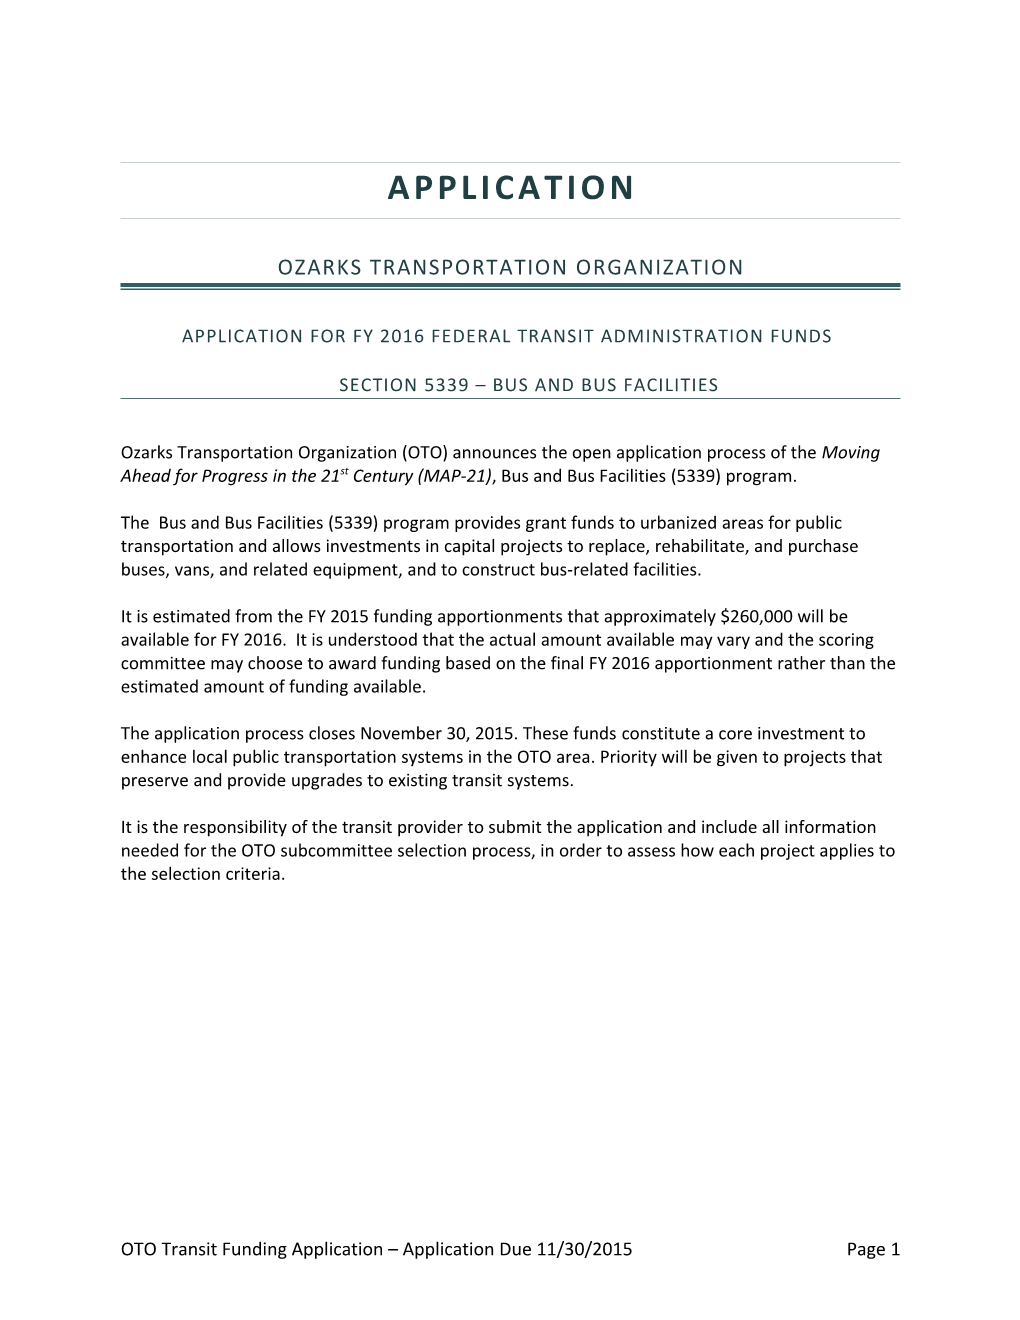 Application for FY 2016Federal Transit Administration Fundssection 5339 BUS and BUS FACILITIES